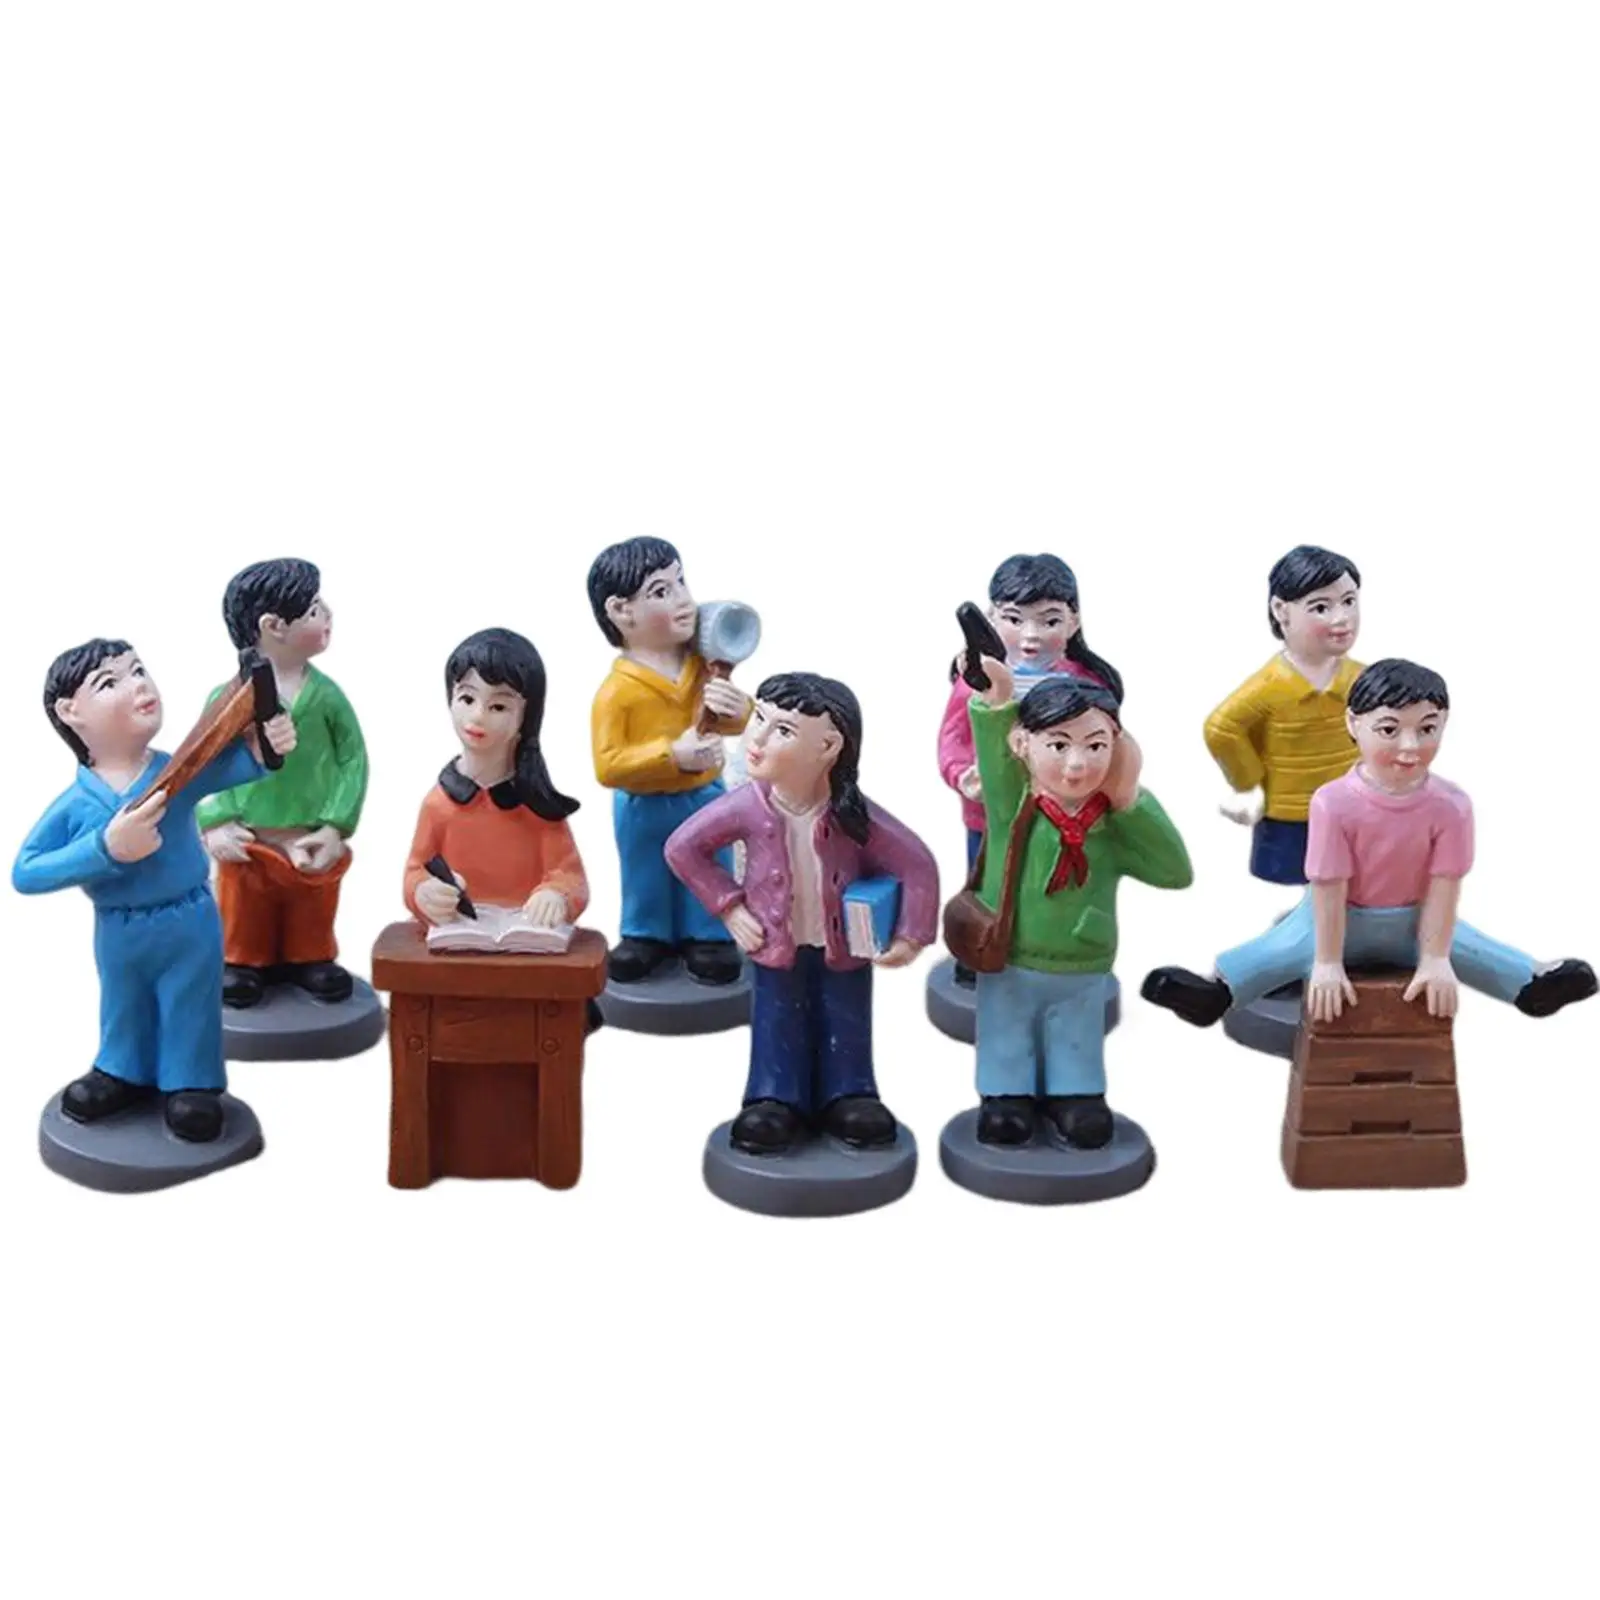 9 Pieces Realistic People Figurines for Trains Architectural Diorama Layout